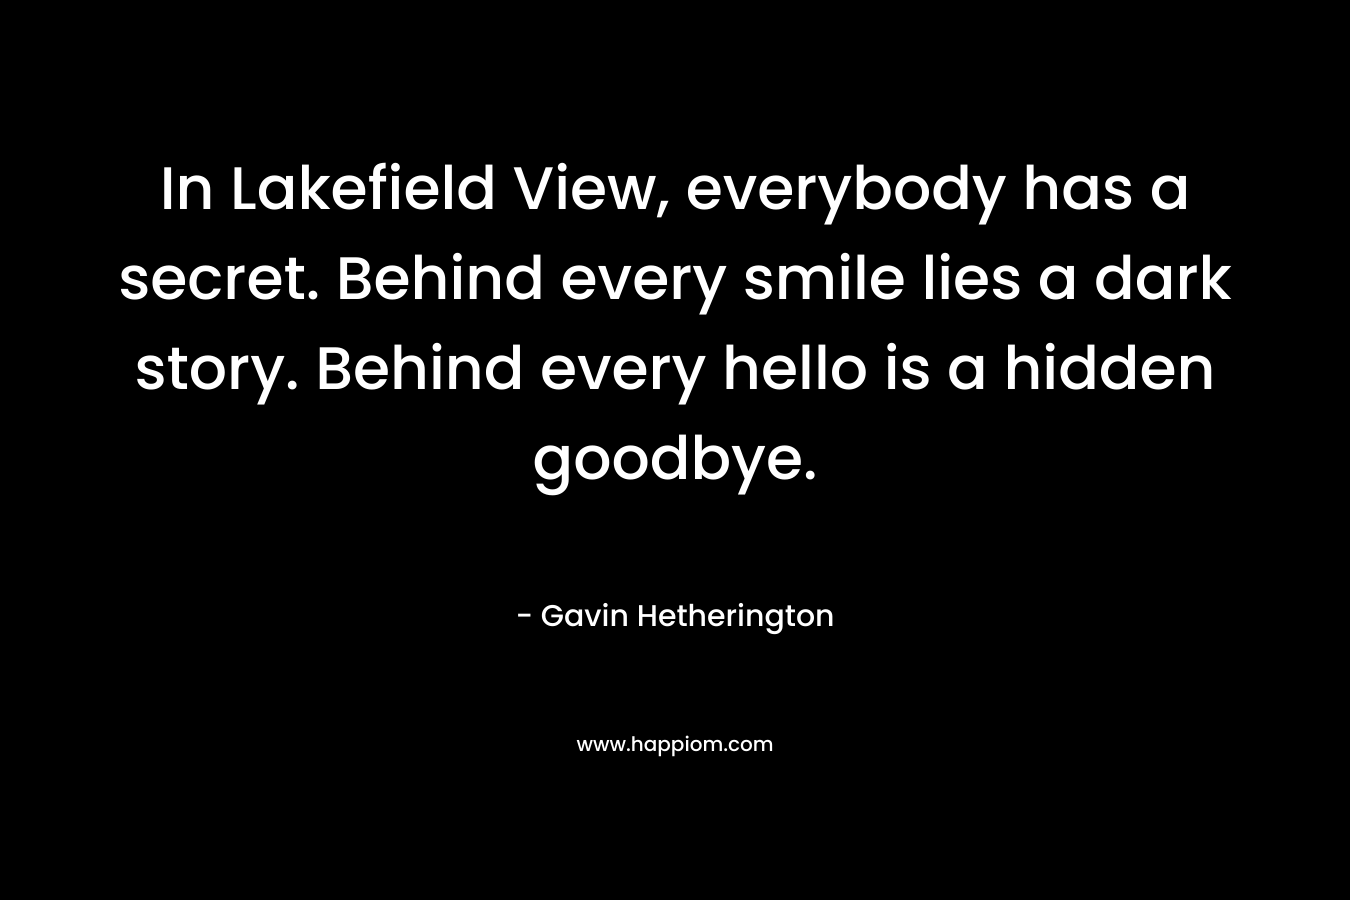 In Lakefield View, everybody has a secret. Behind every smile lies a dark story. Behind every hello is a hidden goodbye.